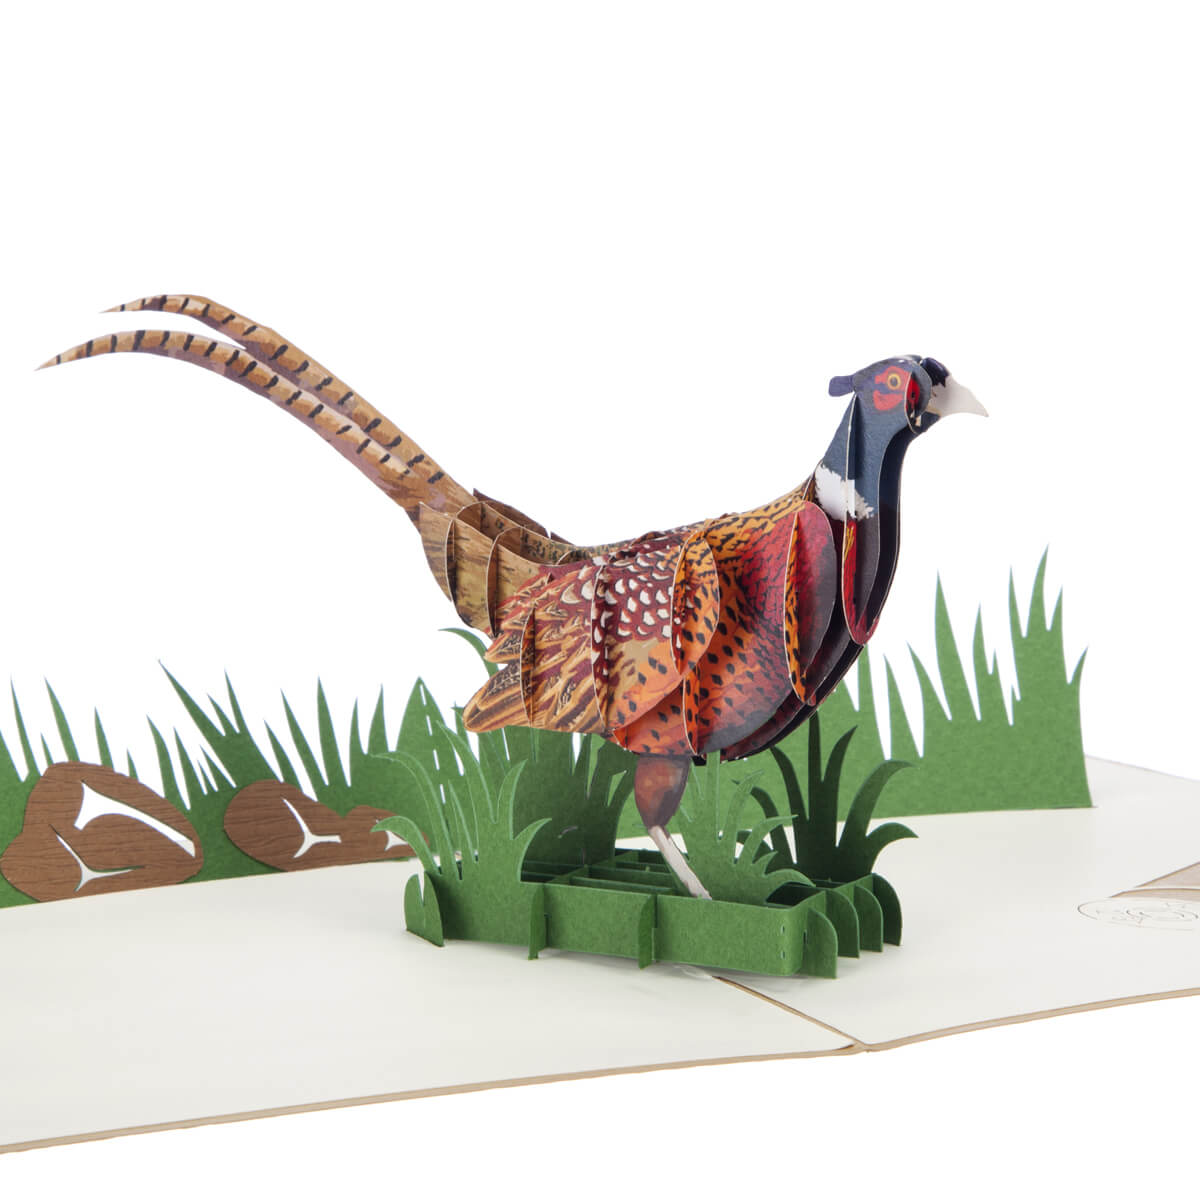 Pheasant "Takes Some Beating" Pop Up Card